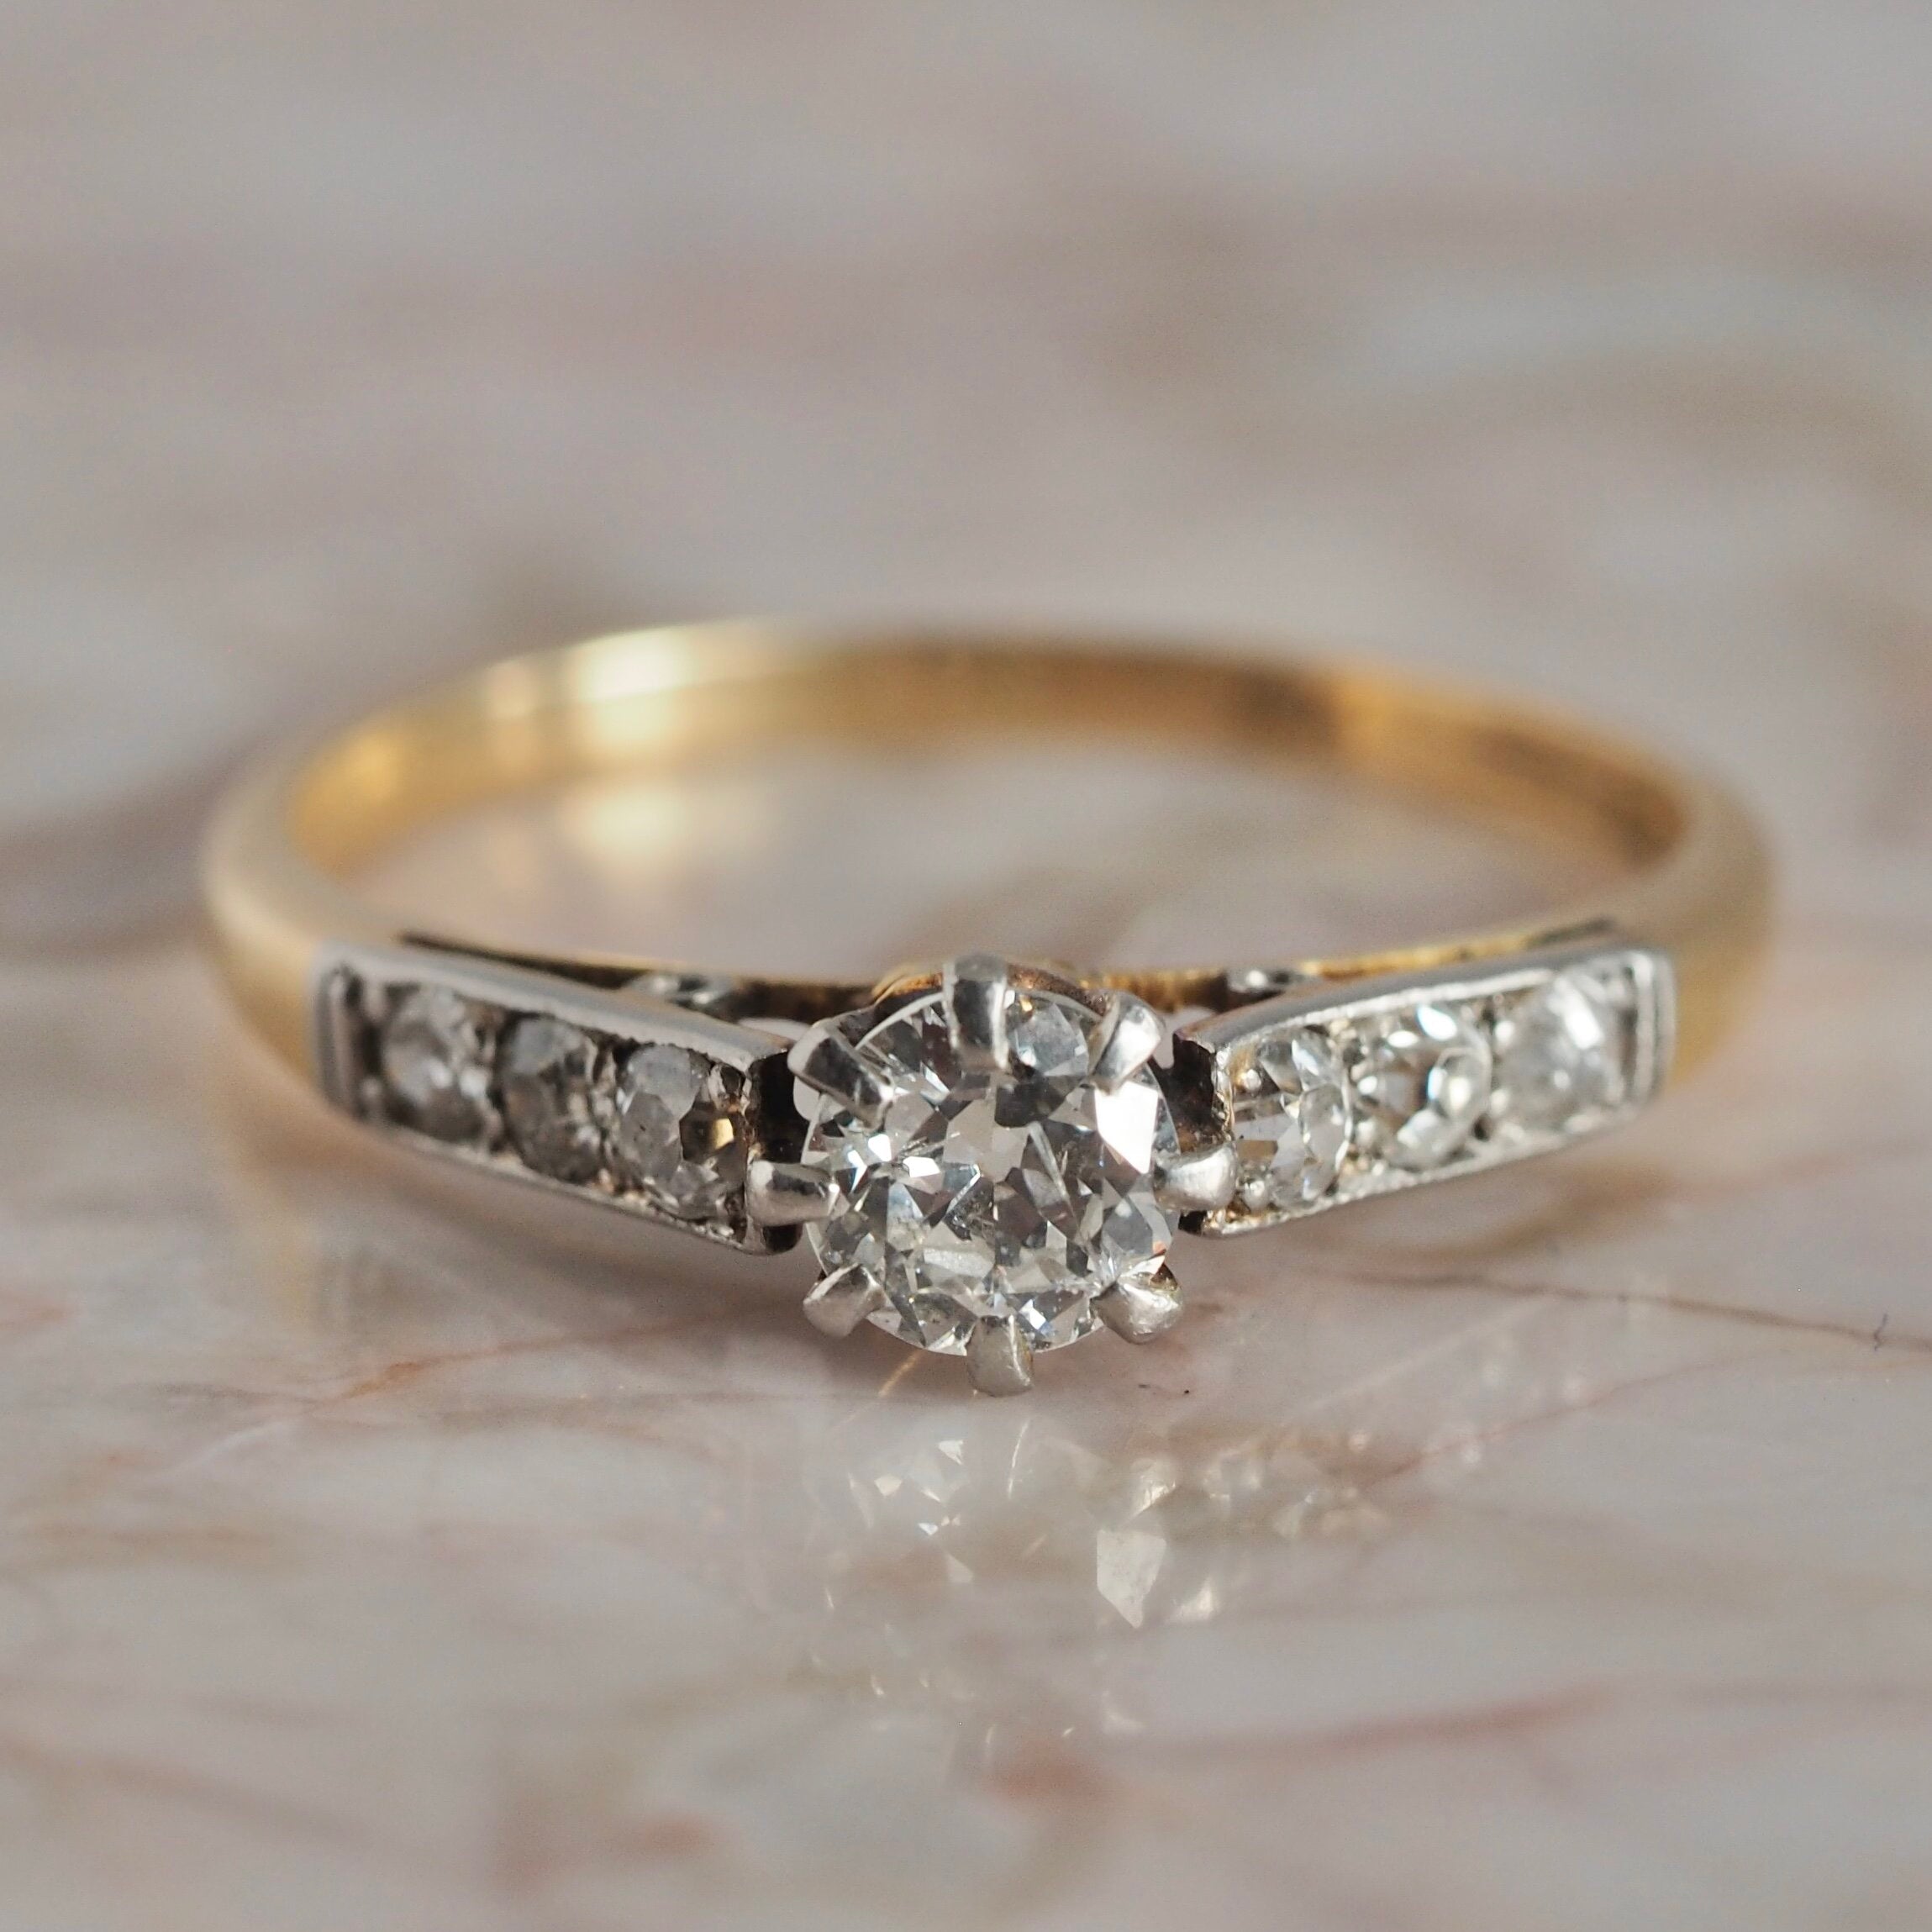 Antique Early Edwardian 18k Gold and Platinum Old European Cut Diamond Ring